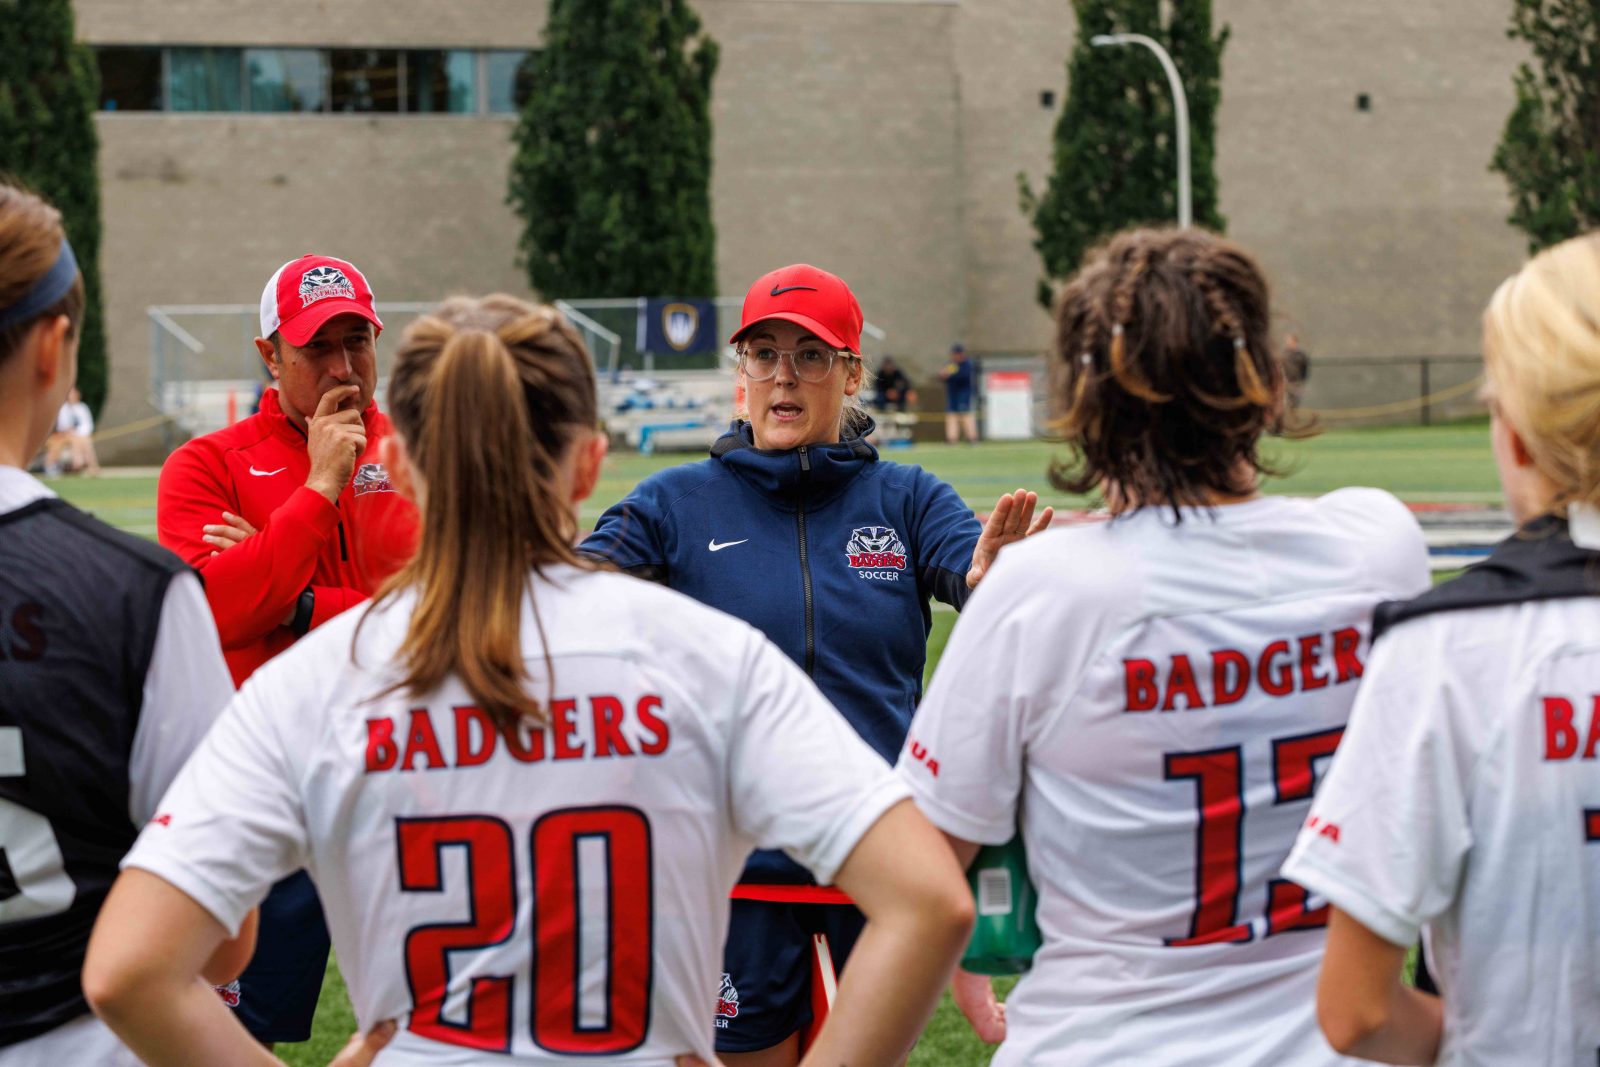 A coach stands speaking to a team of student-athletes on an outdoor field.